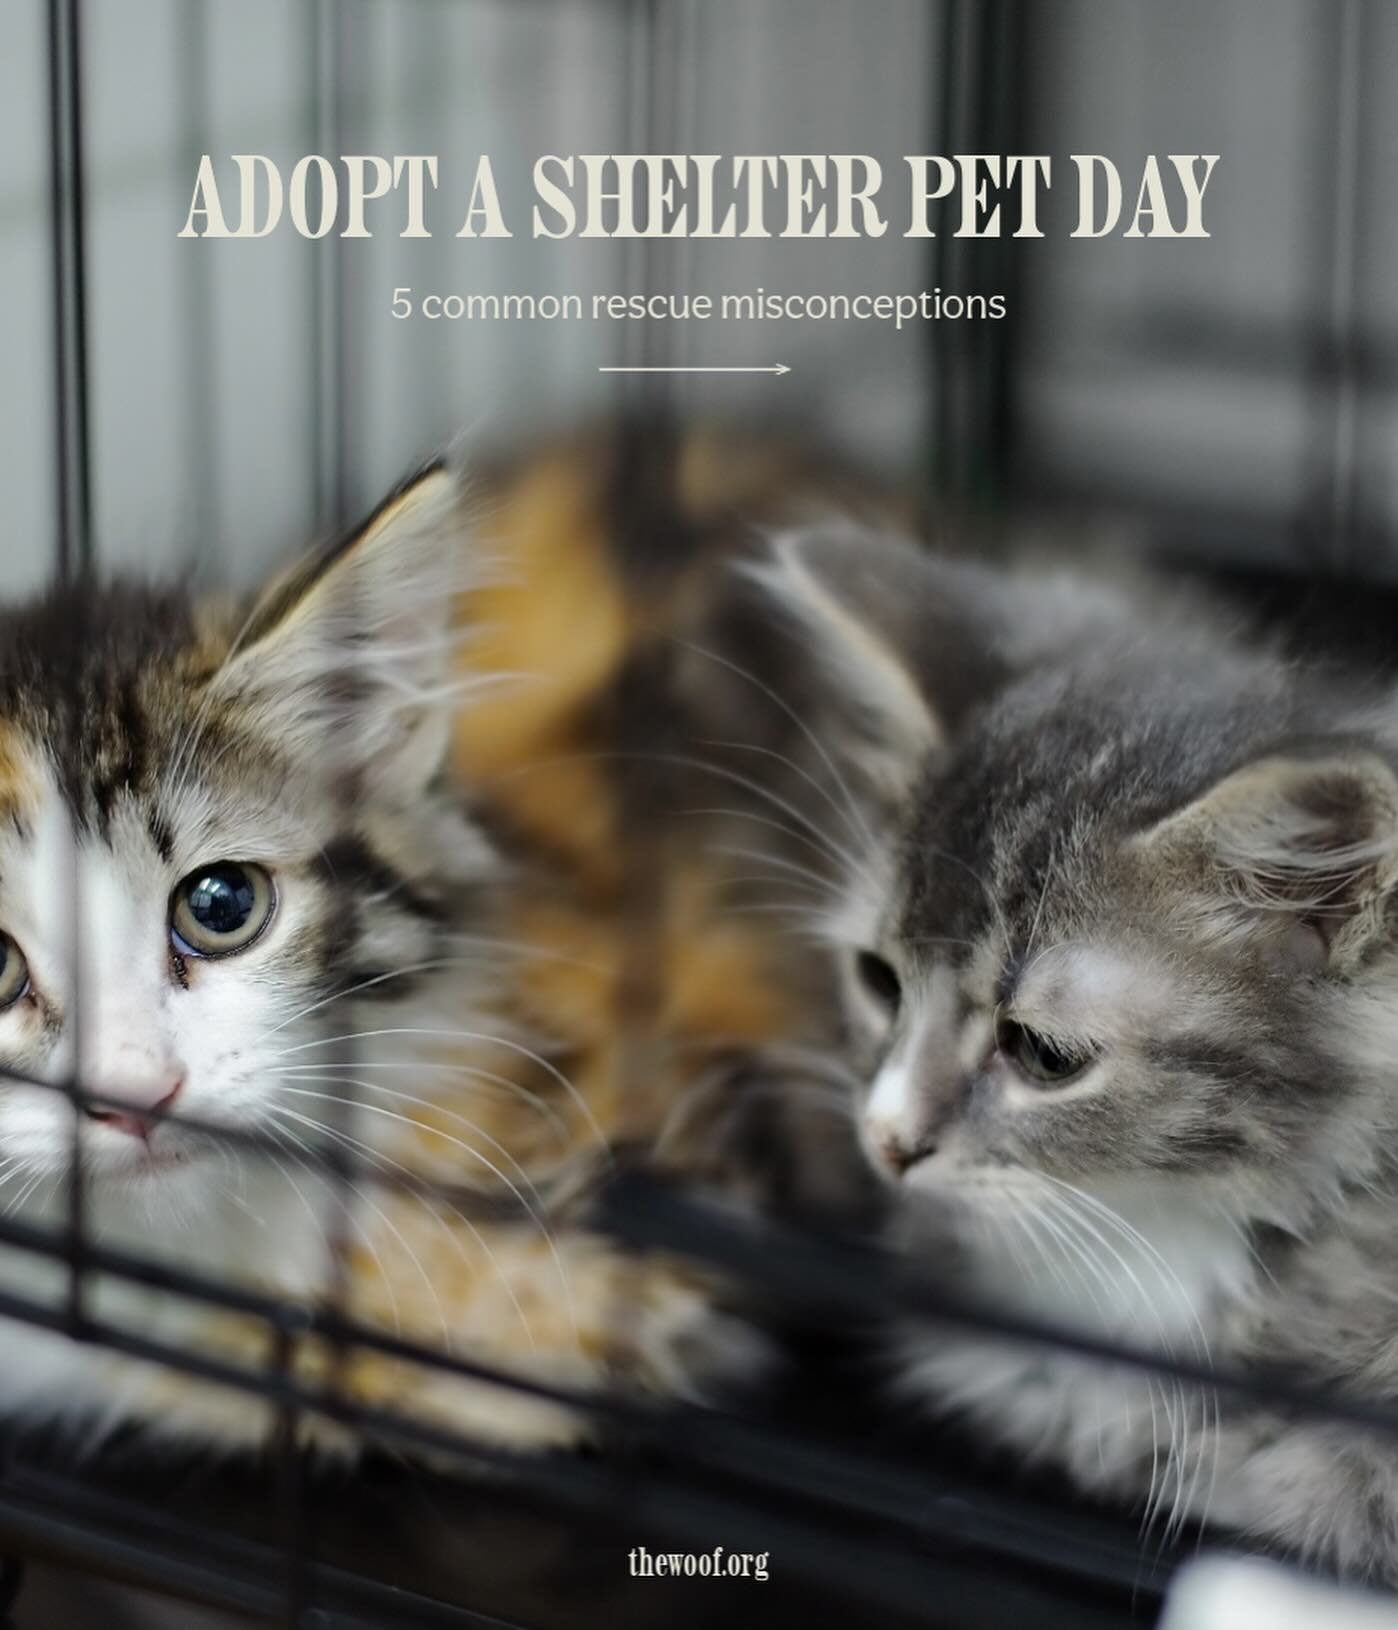 Today is #NationalAdoptAShelterPetDay and we&rsquo;re to dispel some common myths about shelter pets. Shelters allow these animals a second chance at life, consider adoption today &amp; everyday!